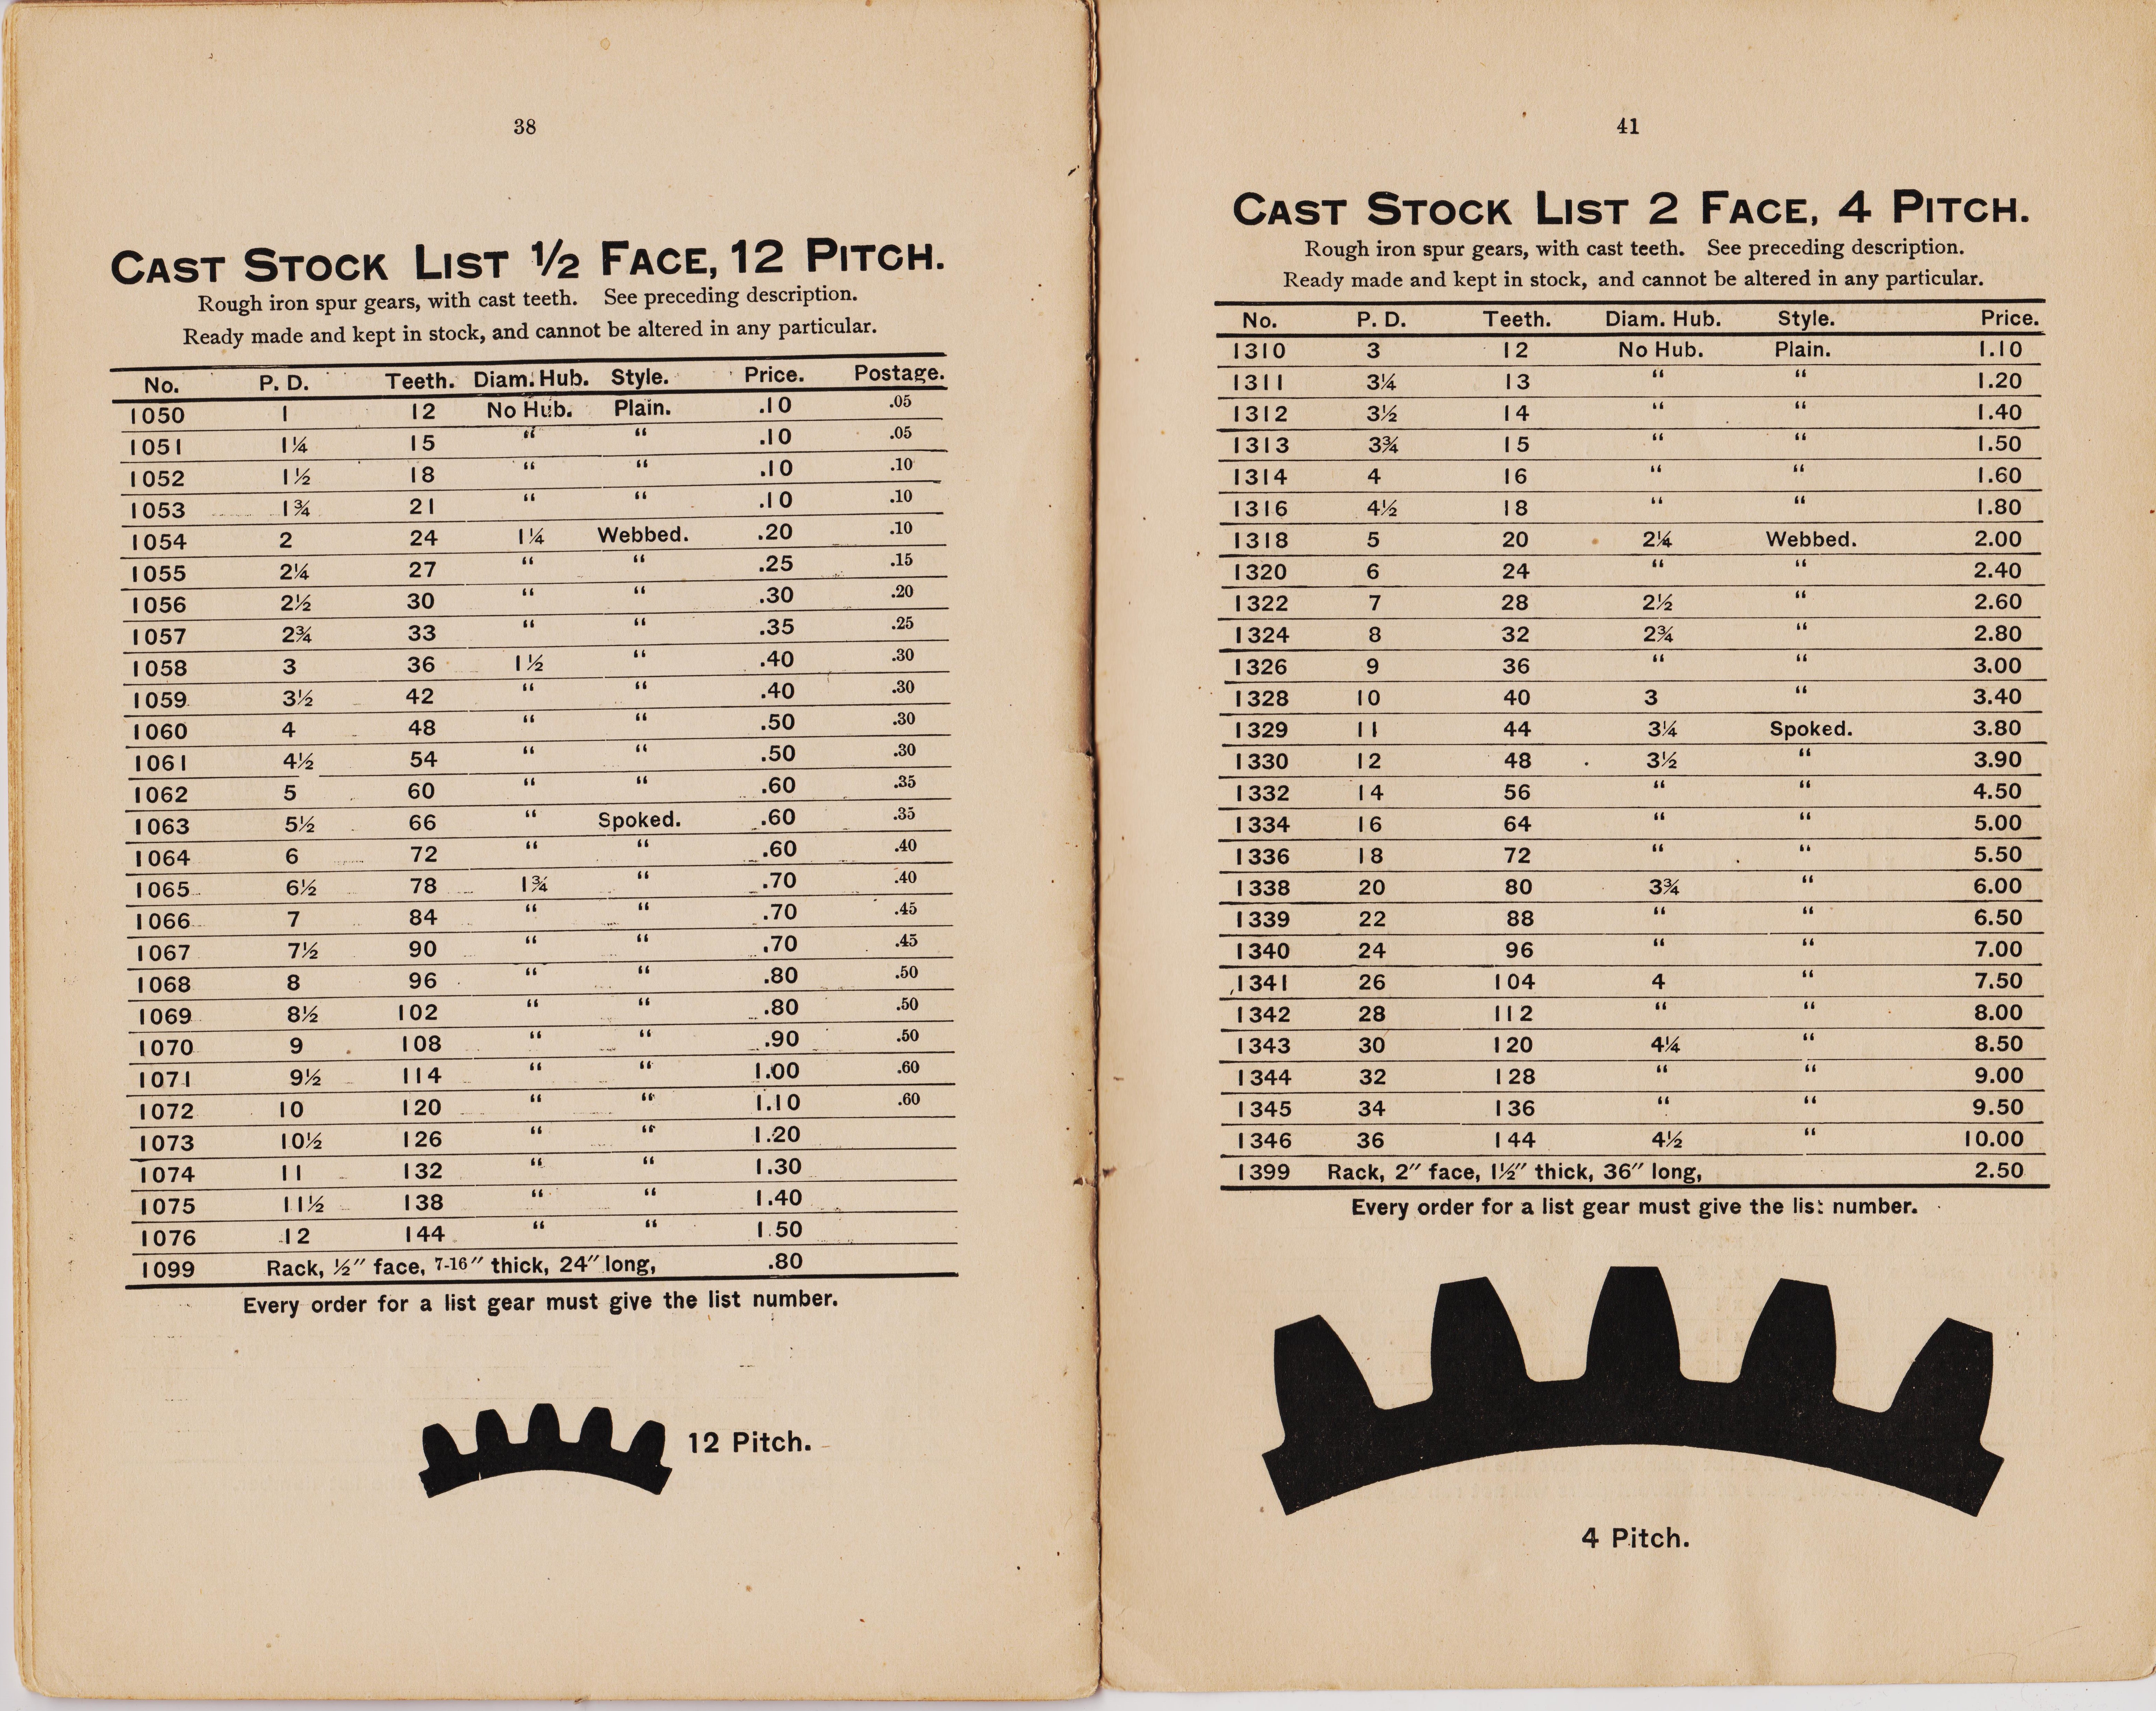 
http://antiquemachinery.com/images-2020/Grants-Gear-Book-Lexington-Gear-Works-1892-page-38-41-Stock-list-One-half-inch-face-12-Pitch-Two-inch-face-4-Pitc.jpg